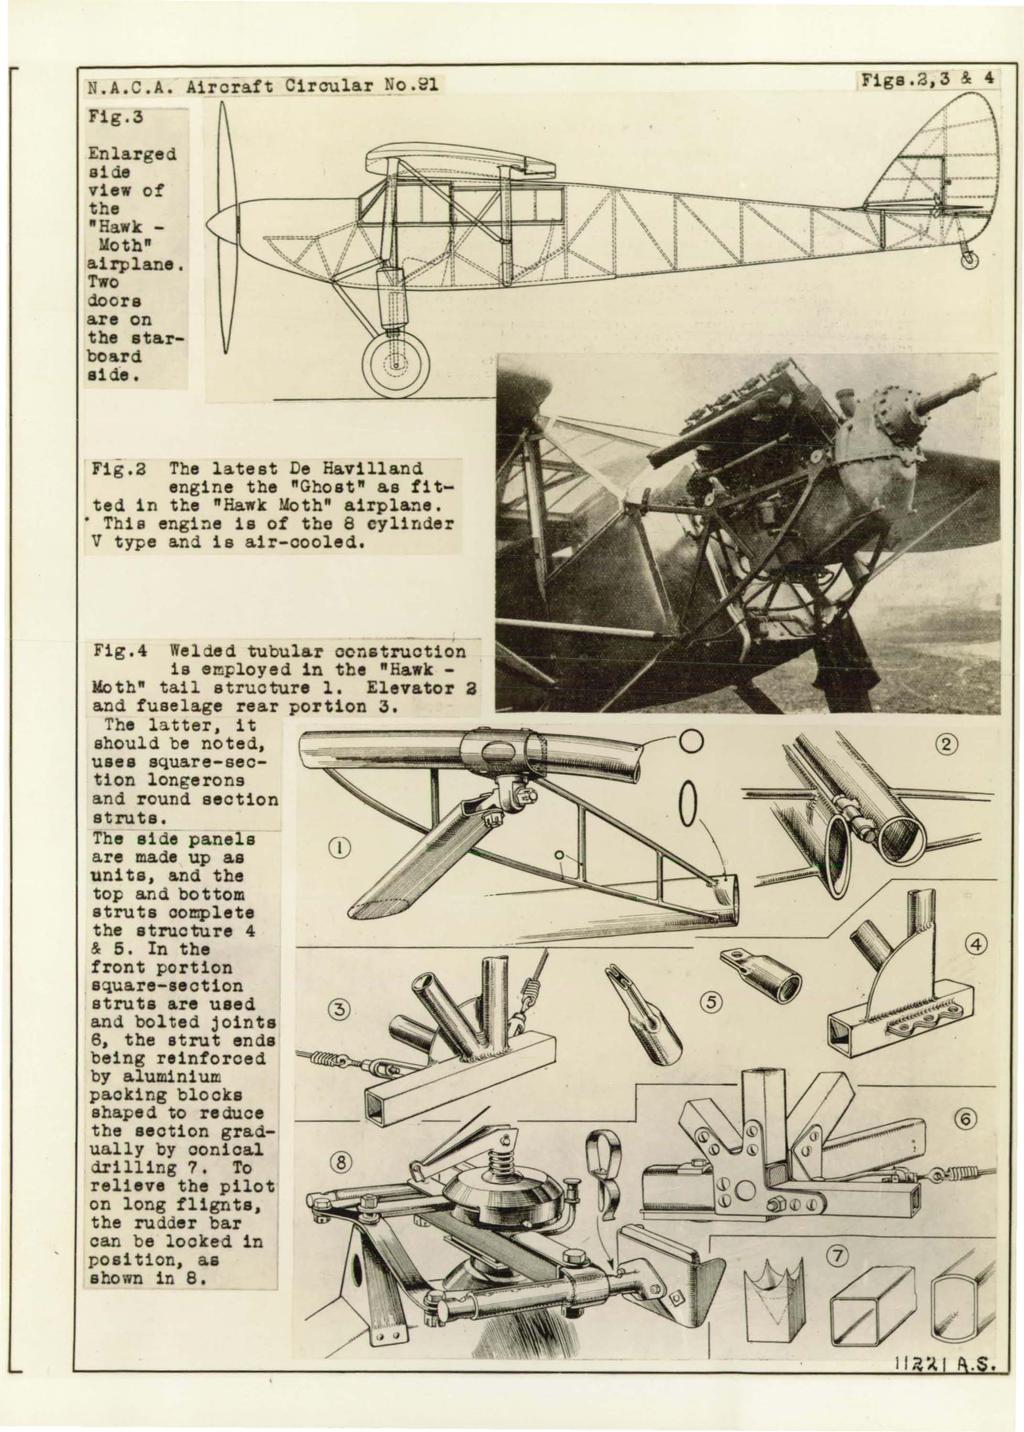 N.A. C.A. Fig.3 Enlarged side view of the "Hawk - Moth" airplane. Two doors are on the starboard side. Circular No.91 Figs. 2,3 & 4 Fig.